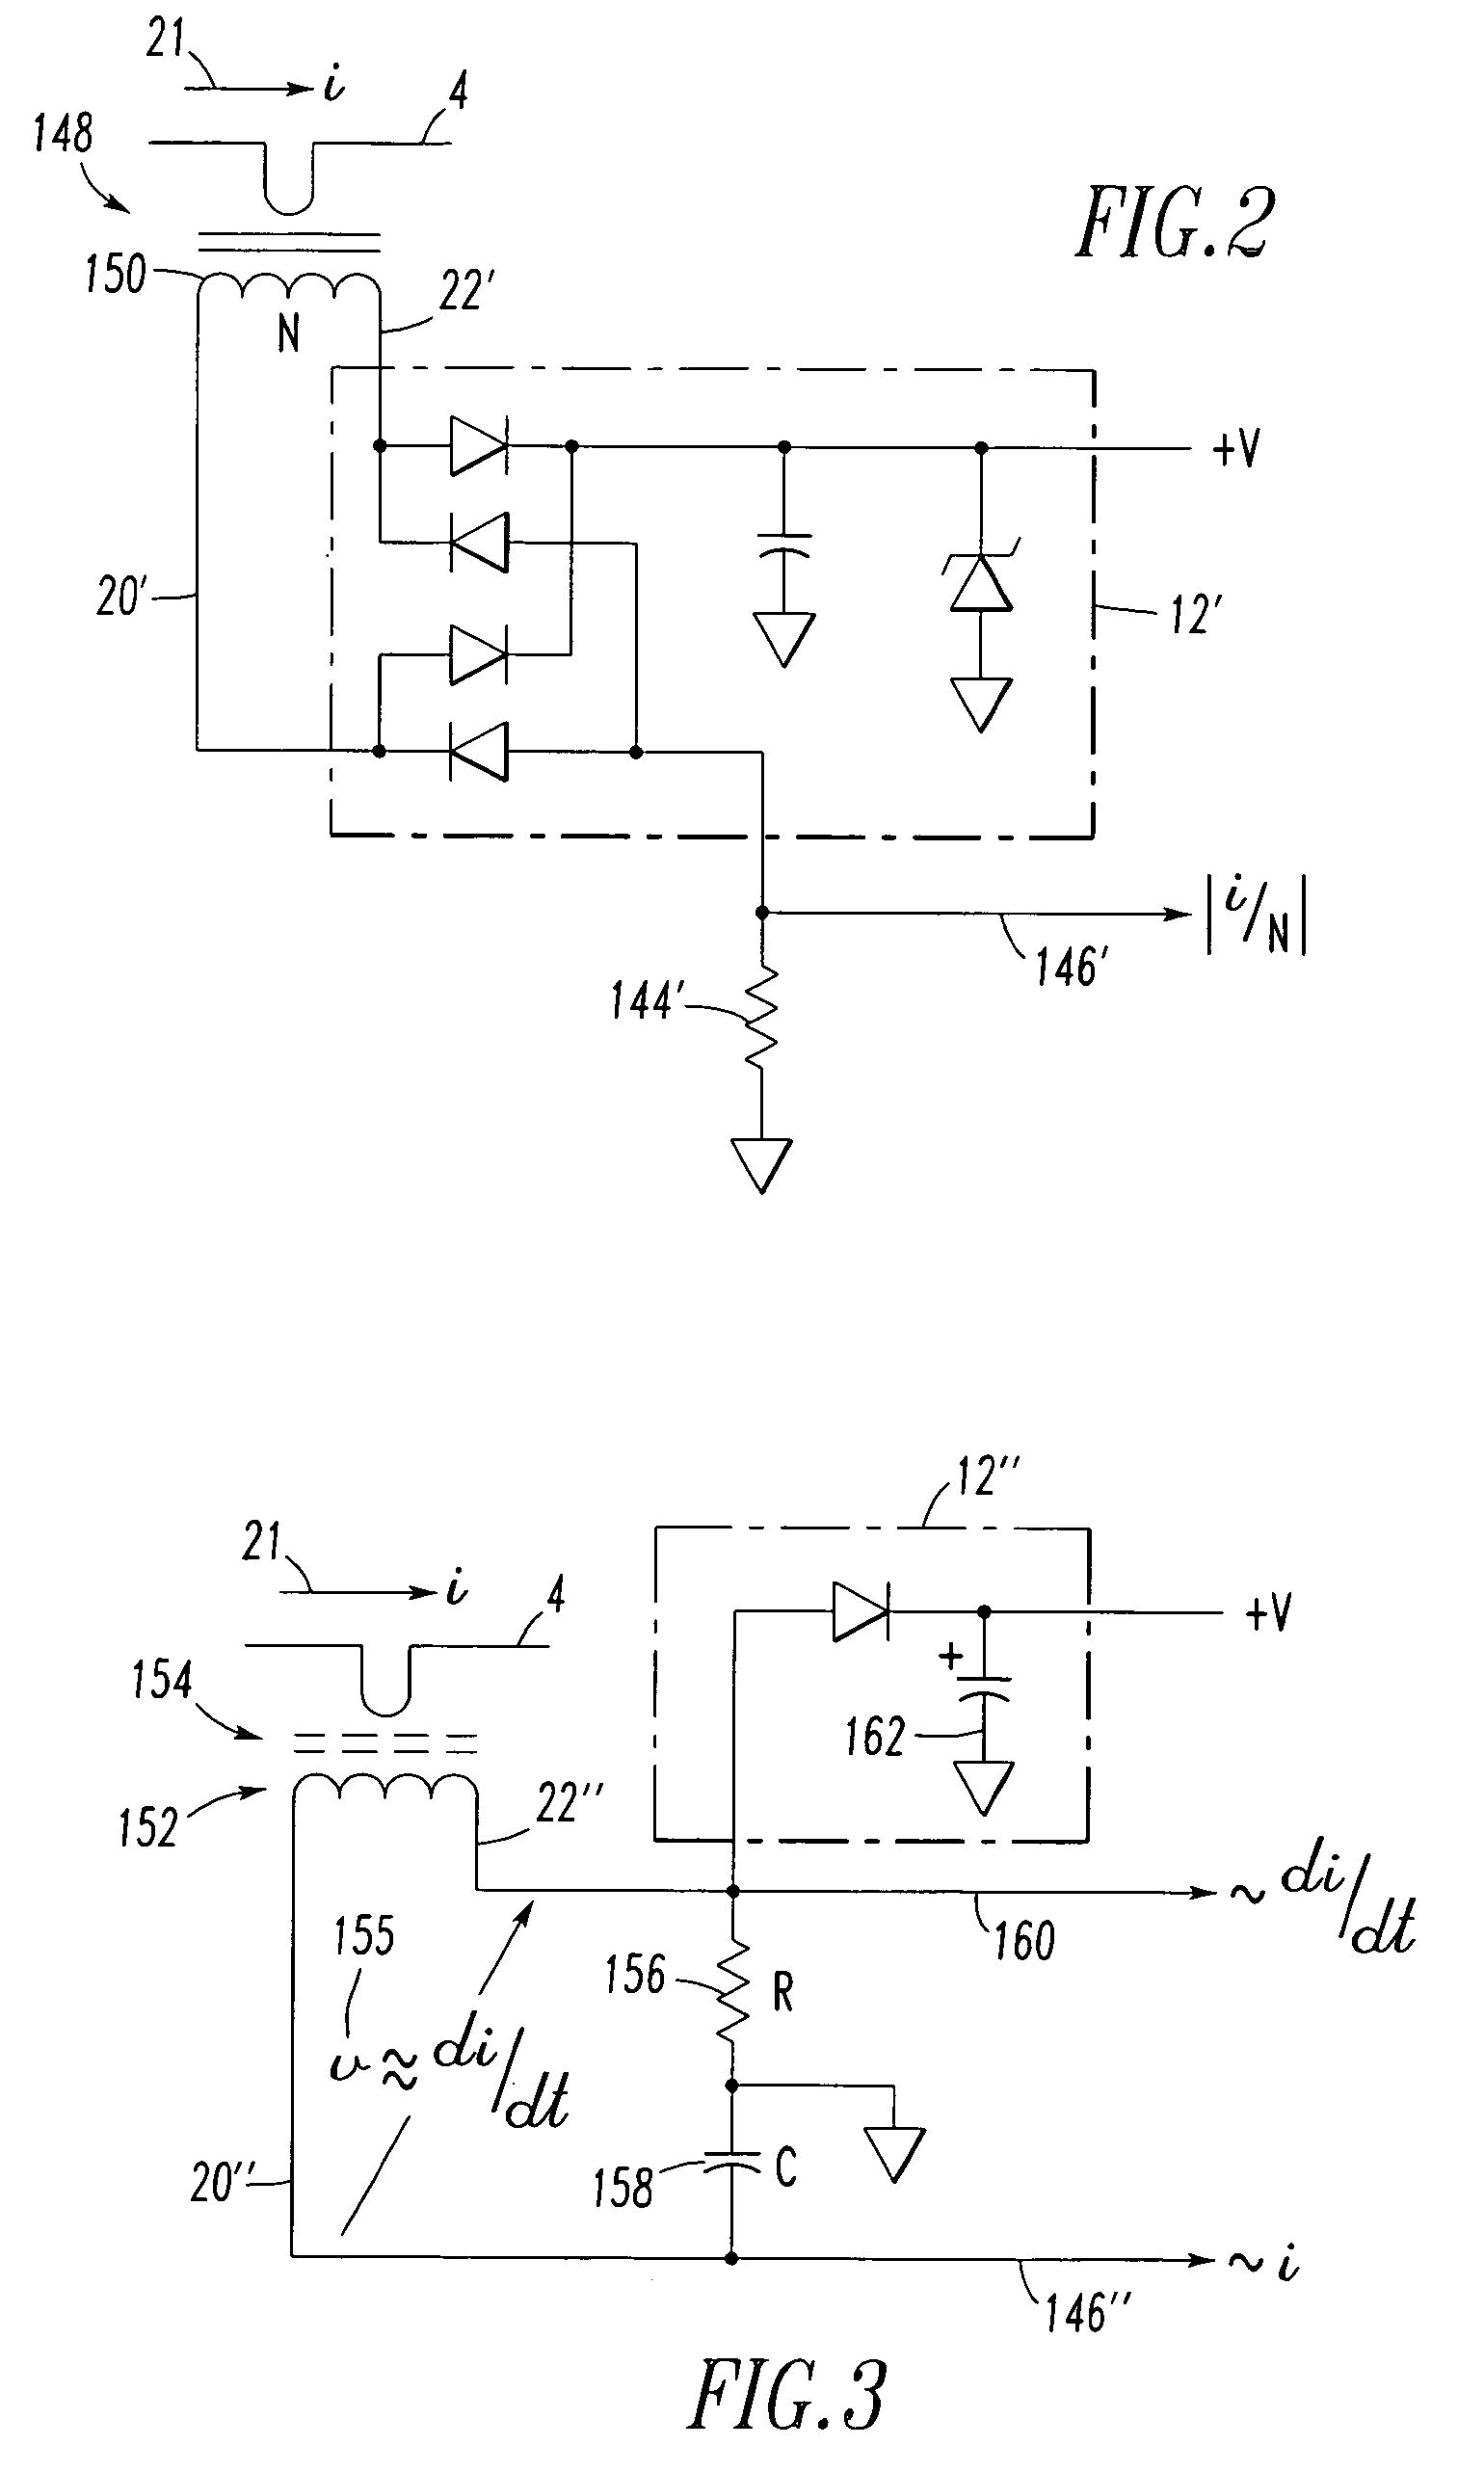 Arc fault detection apparatus, method and system for an underground electrical conductor